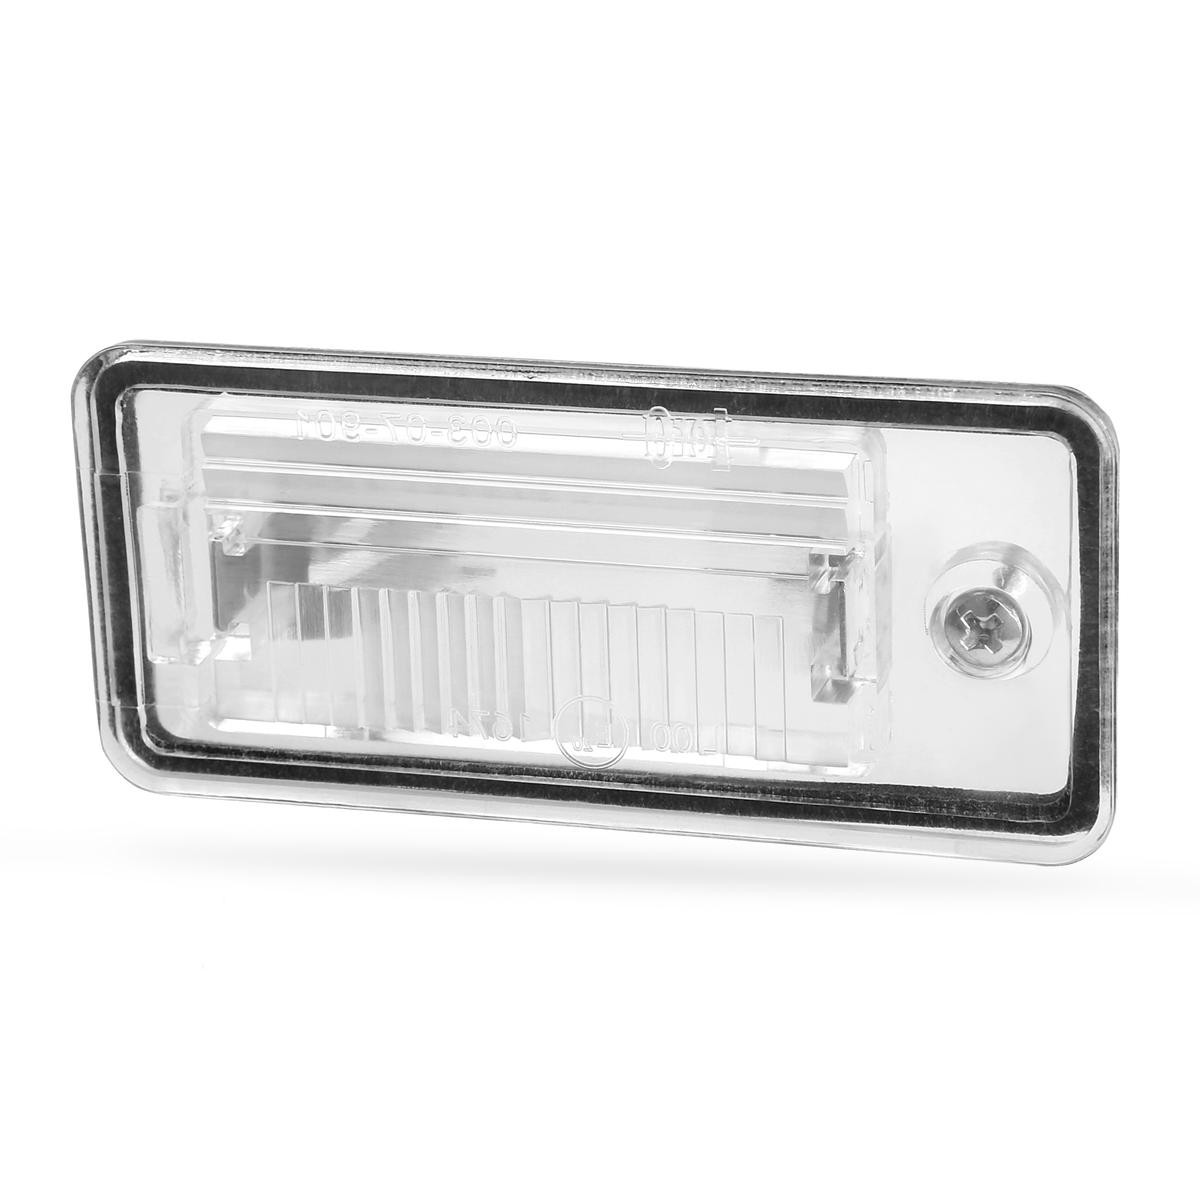 Great value for money - ABAKUS Licence Plate Light 003-07-904